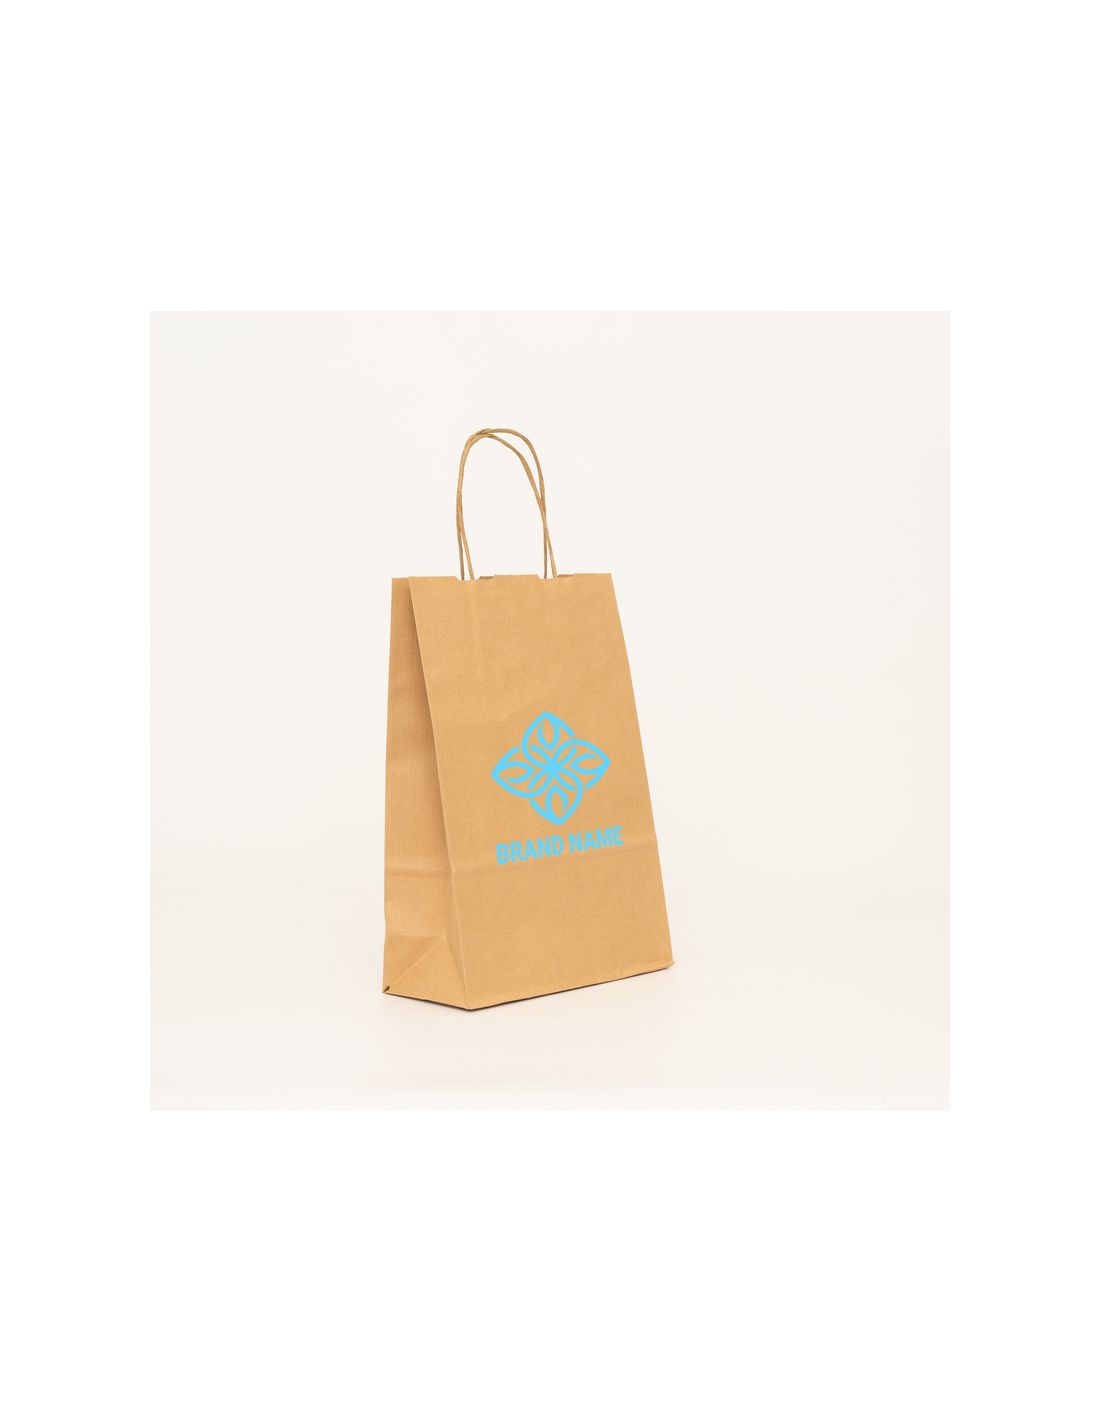 Customized Personalized shopping bag Safari 26x12x34 CM | SHOPPING BAG SAFARI | FLEXO PRINTING IN ONE COLOR ON FIXED AREAS ON...